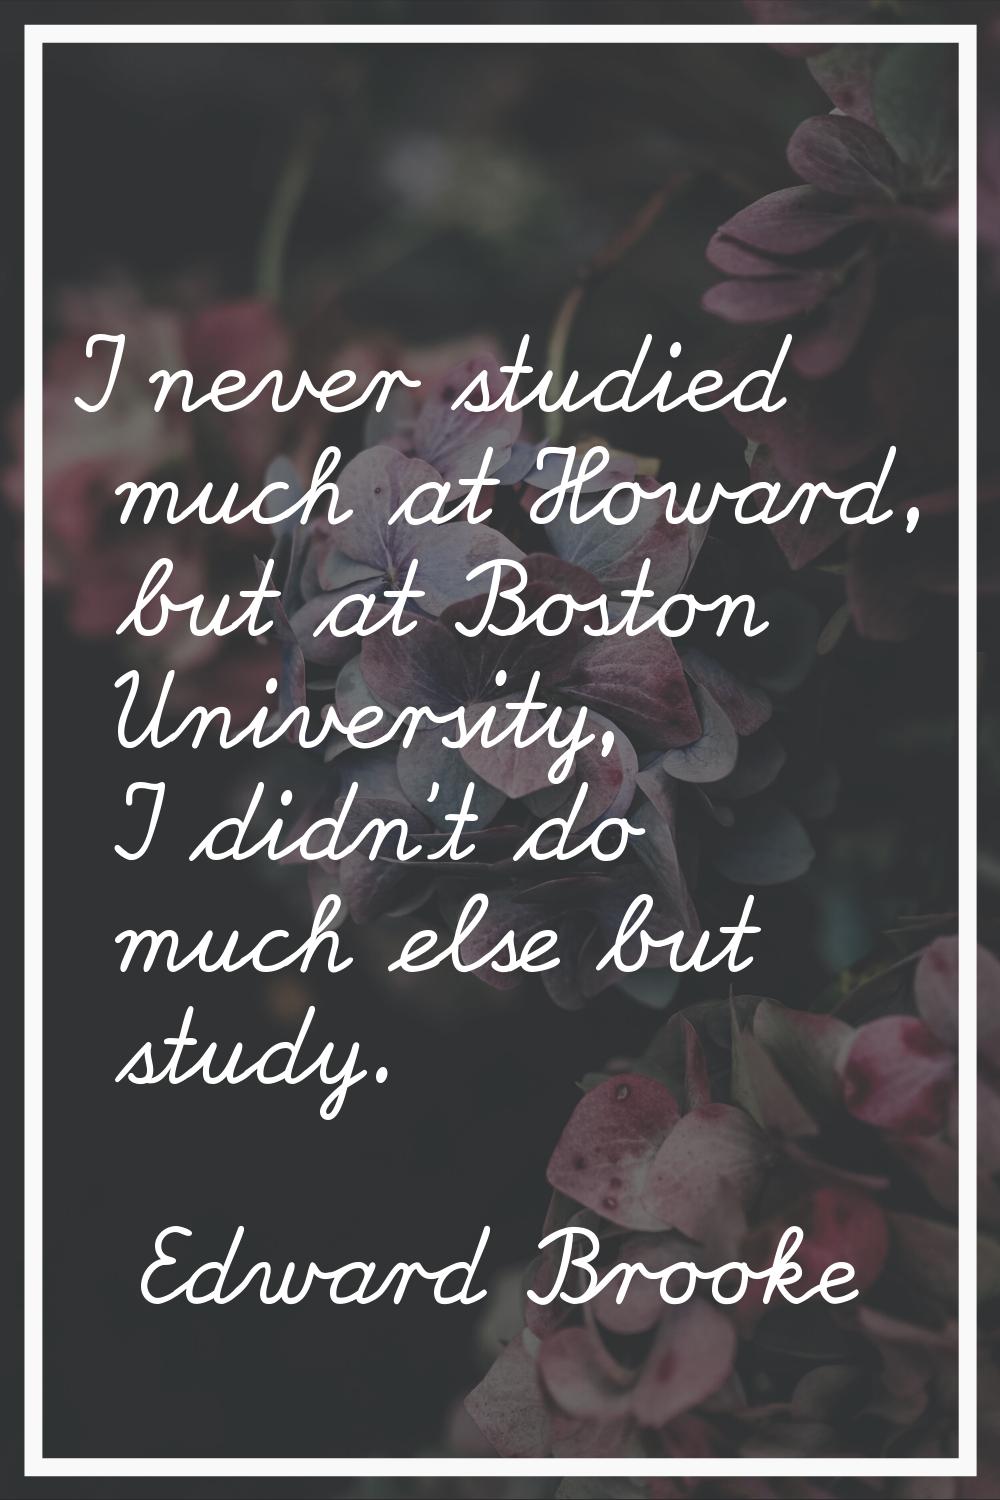 I never studied much at Howard, but at Boston University, I didn't do much else but study.